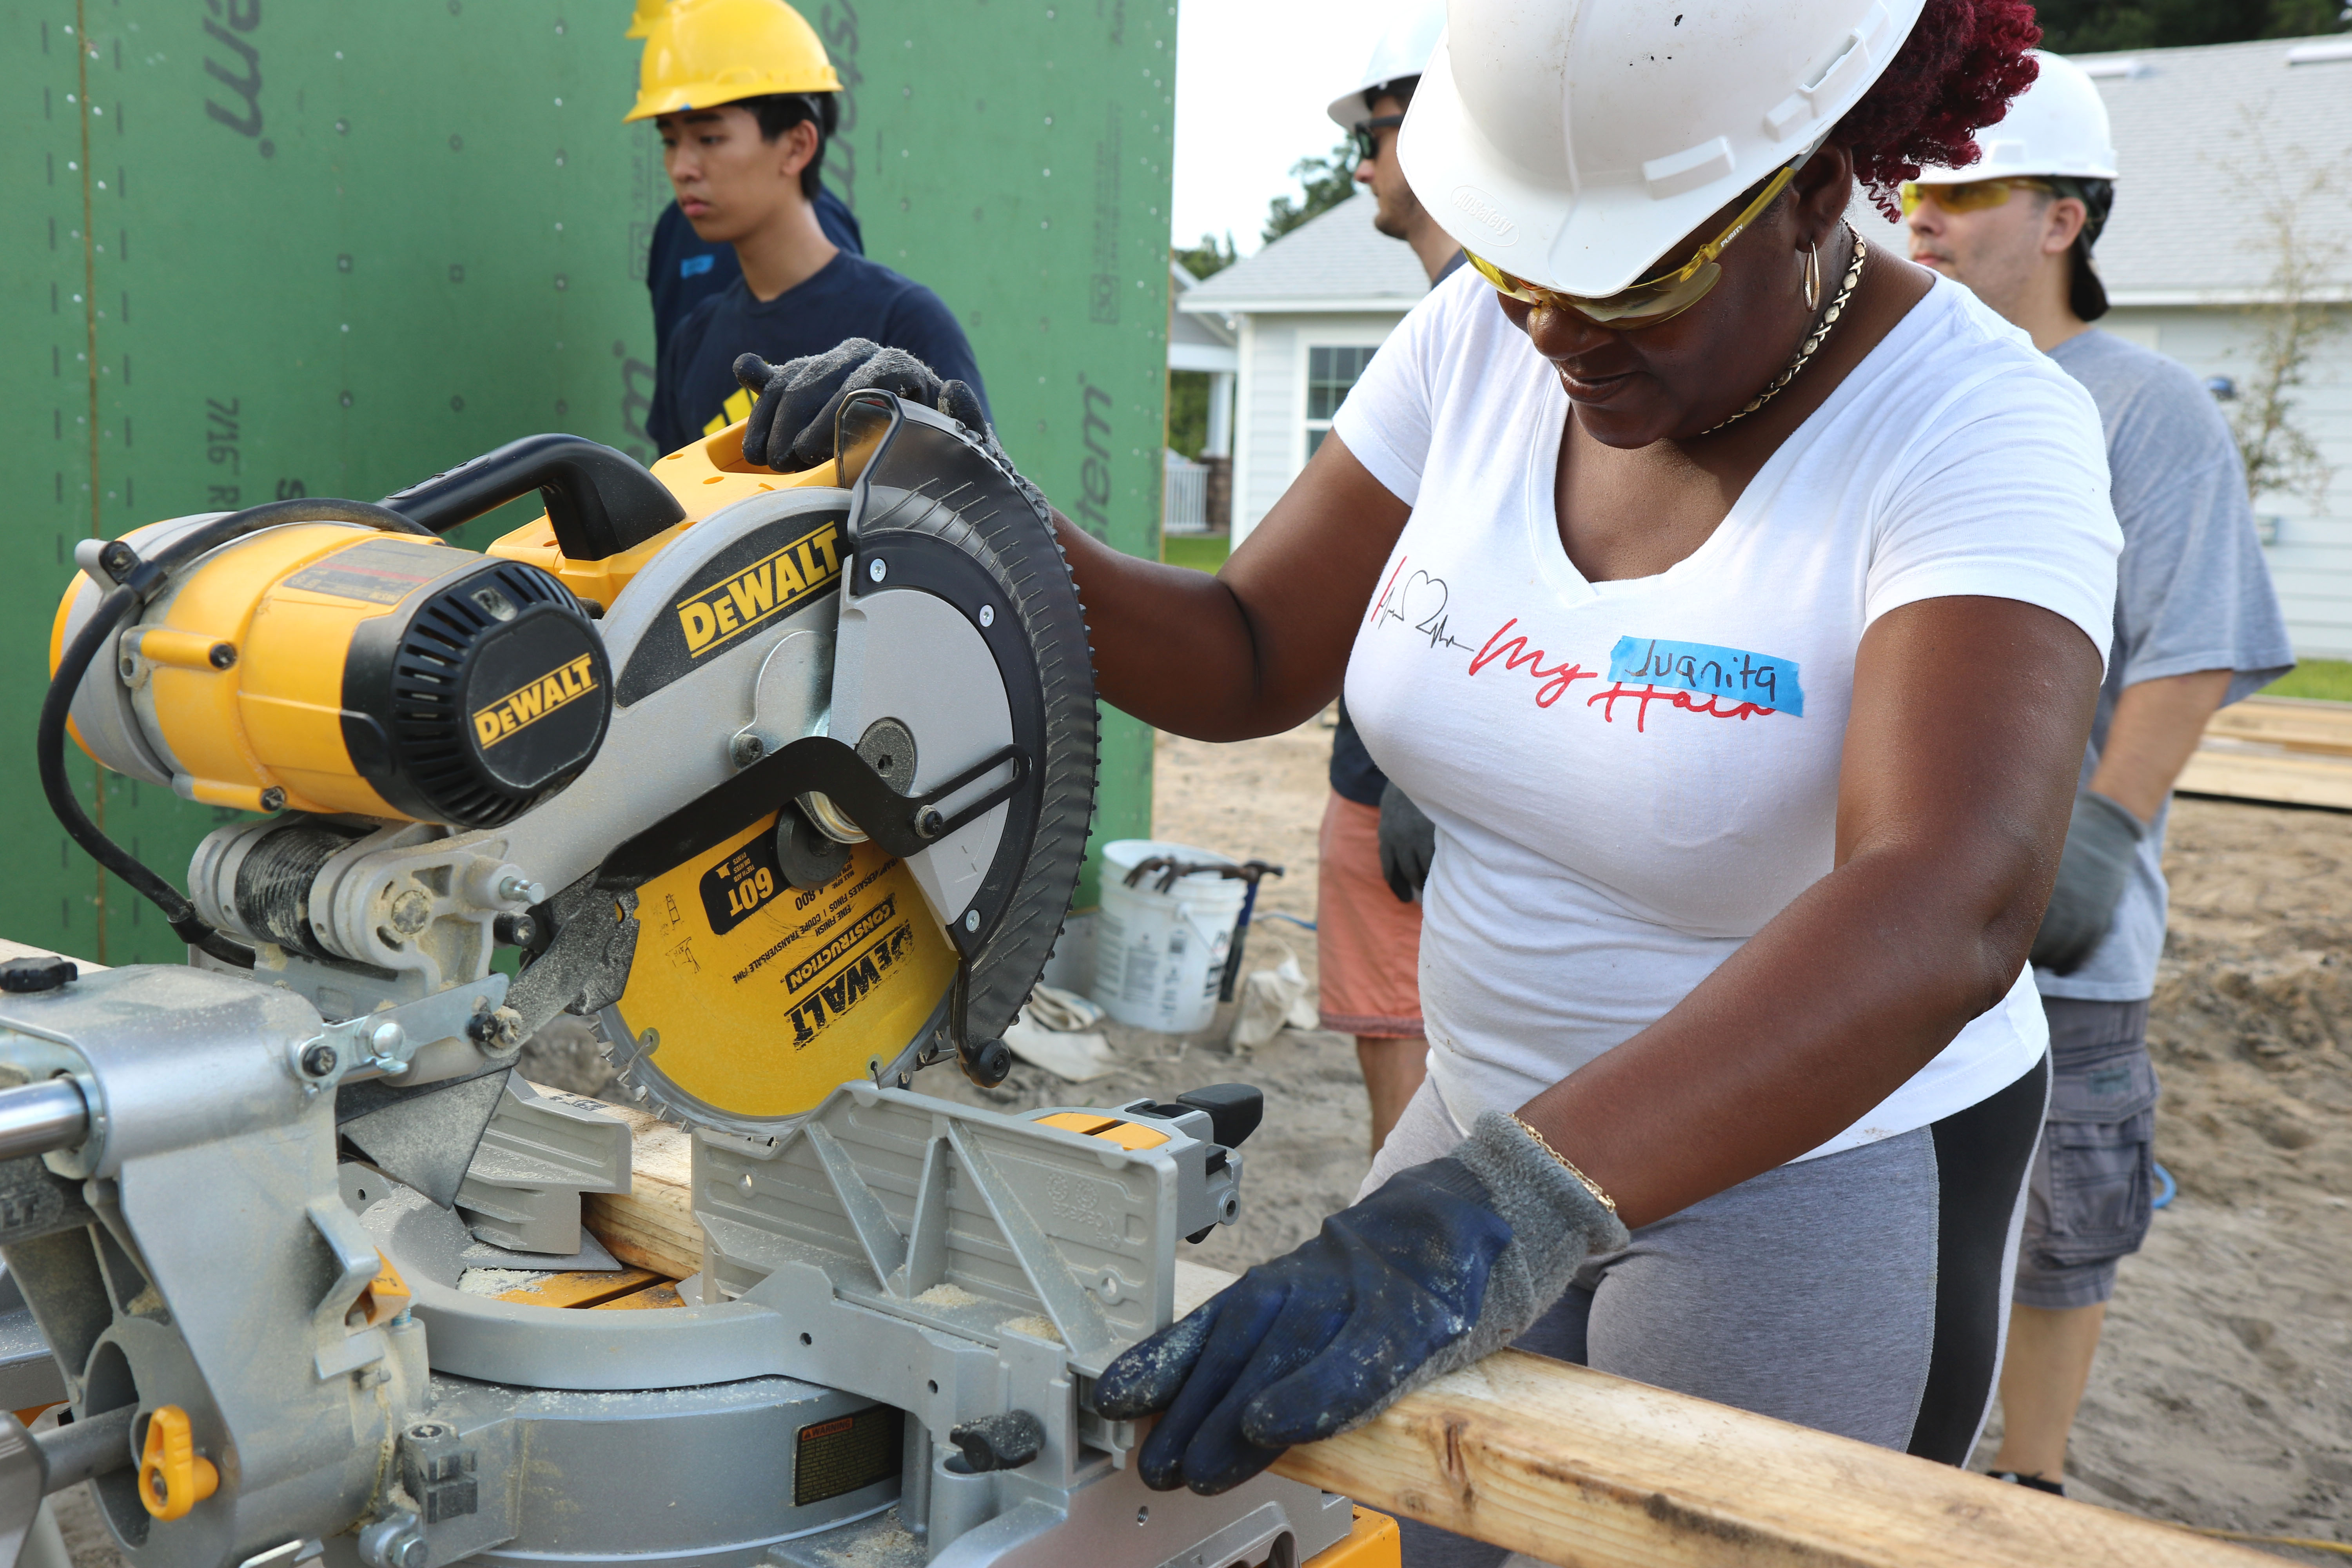 Woman wearing hard hats and glasses, using power saw on build site